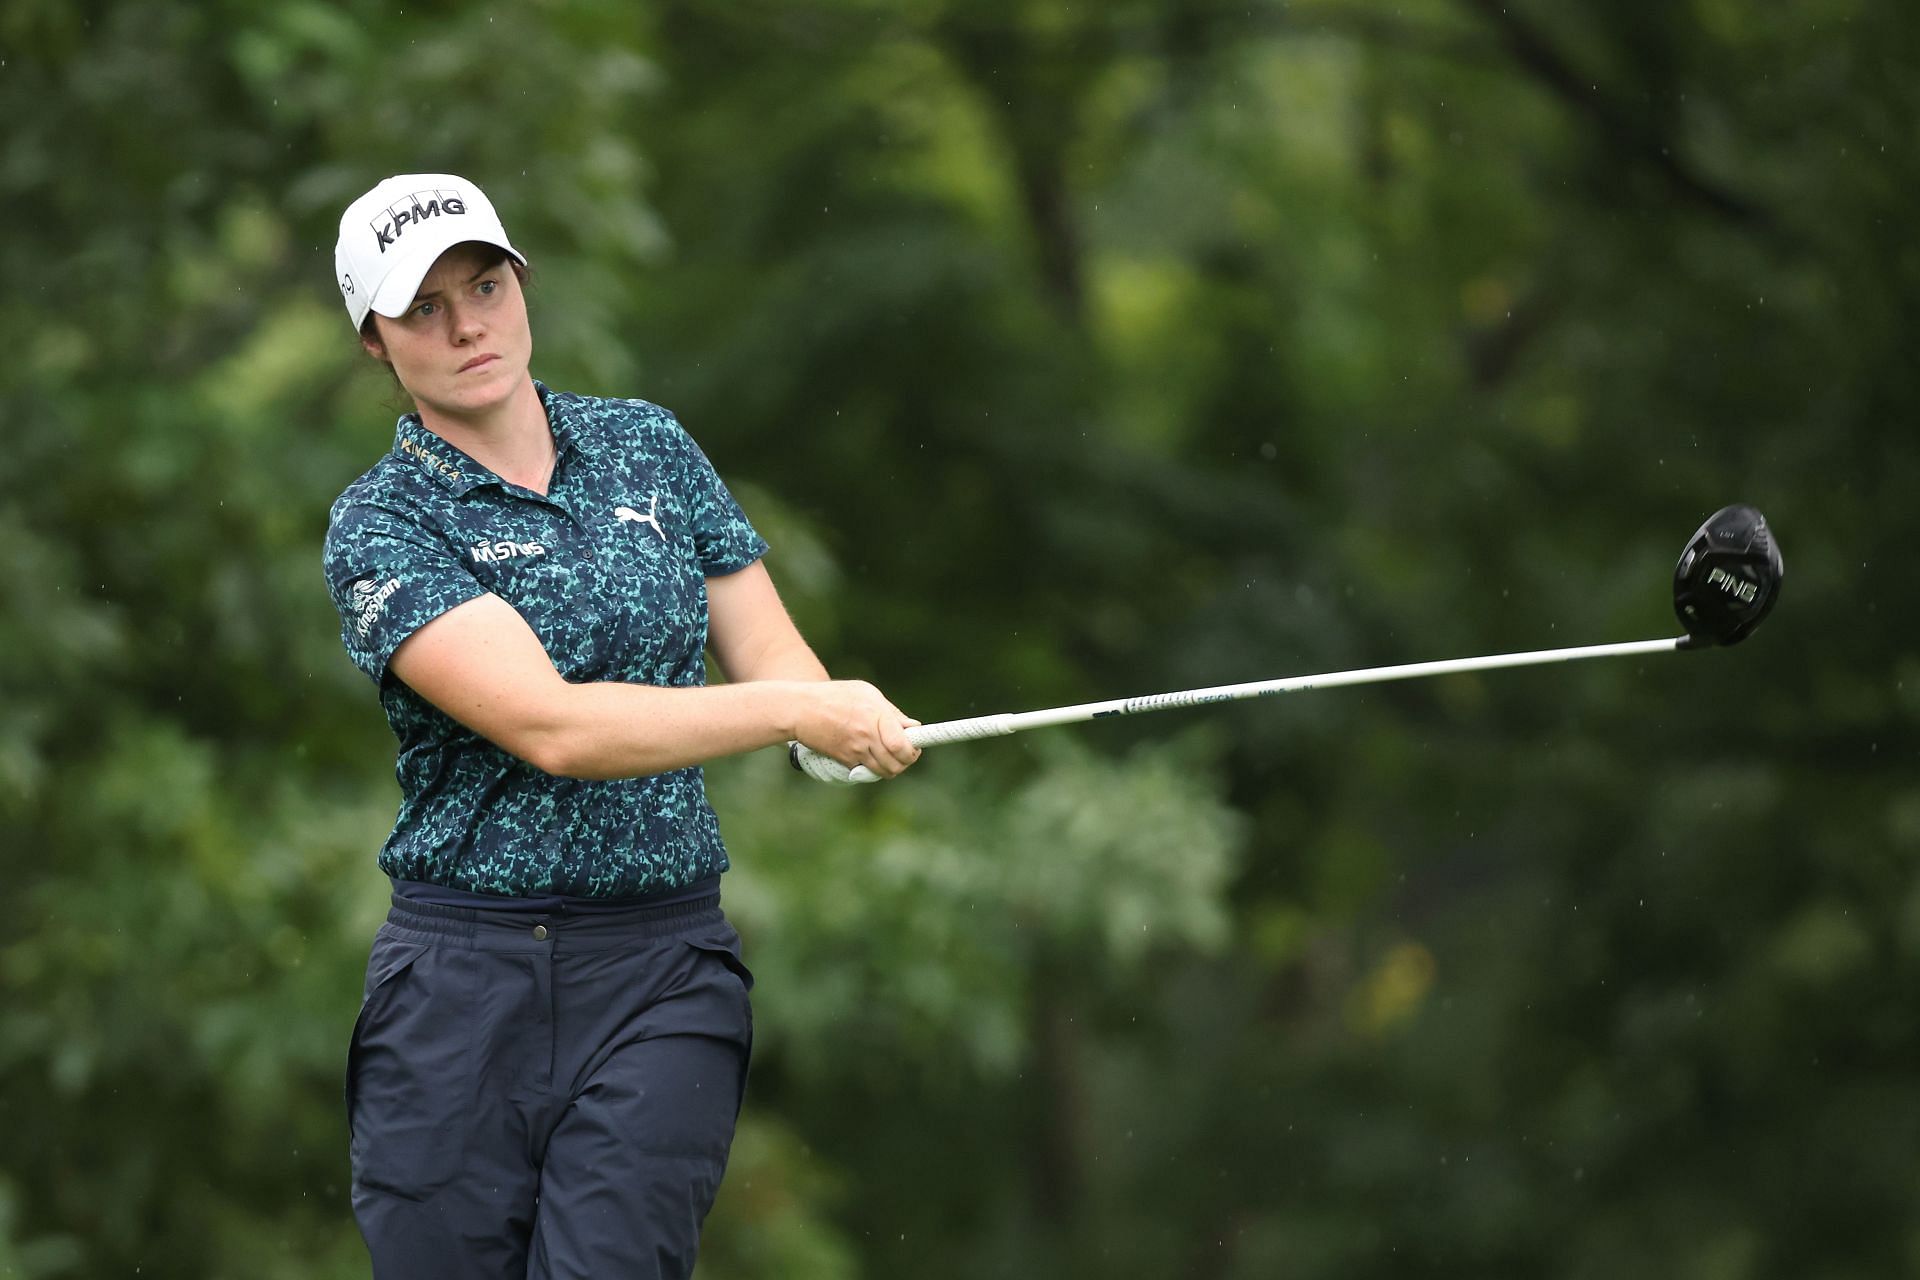 Leona Maguire at the Dana Open presented by Marathon - Final Round (Image via Gregory Shamus/Getty Images)